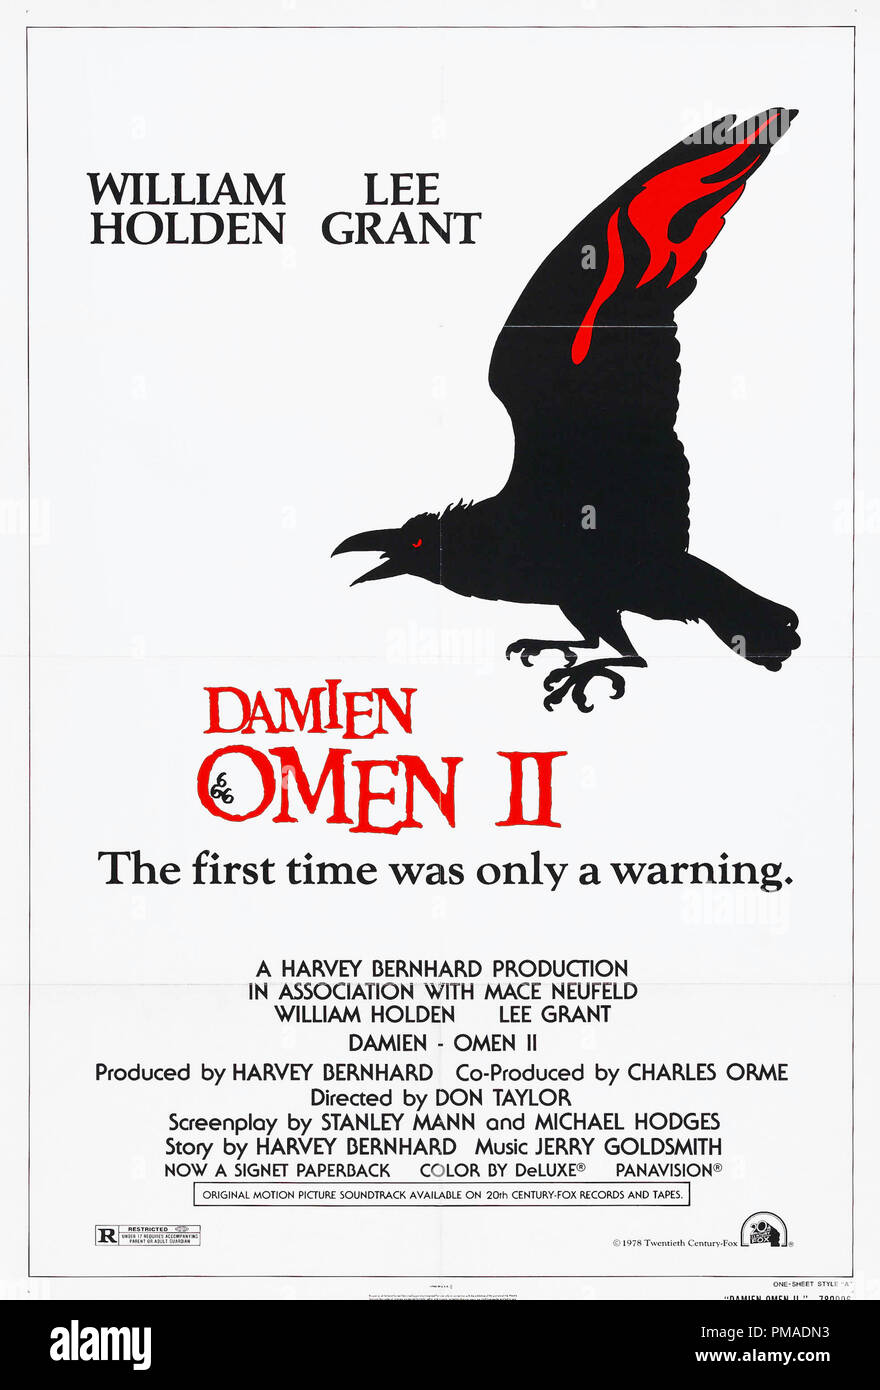 'Damien: Omen II' - US Poster 1978 20th Century Fox  File Reference # 32509 278THA Stock Photo